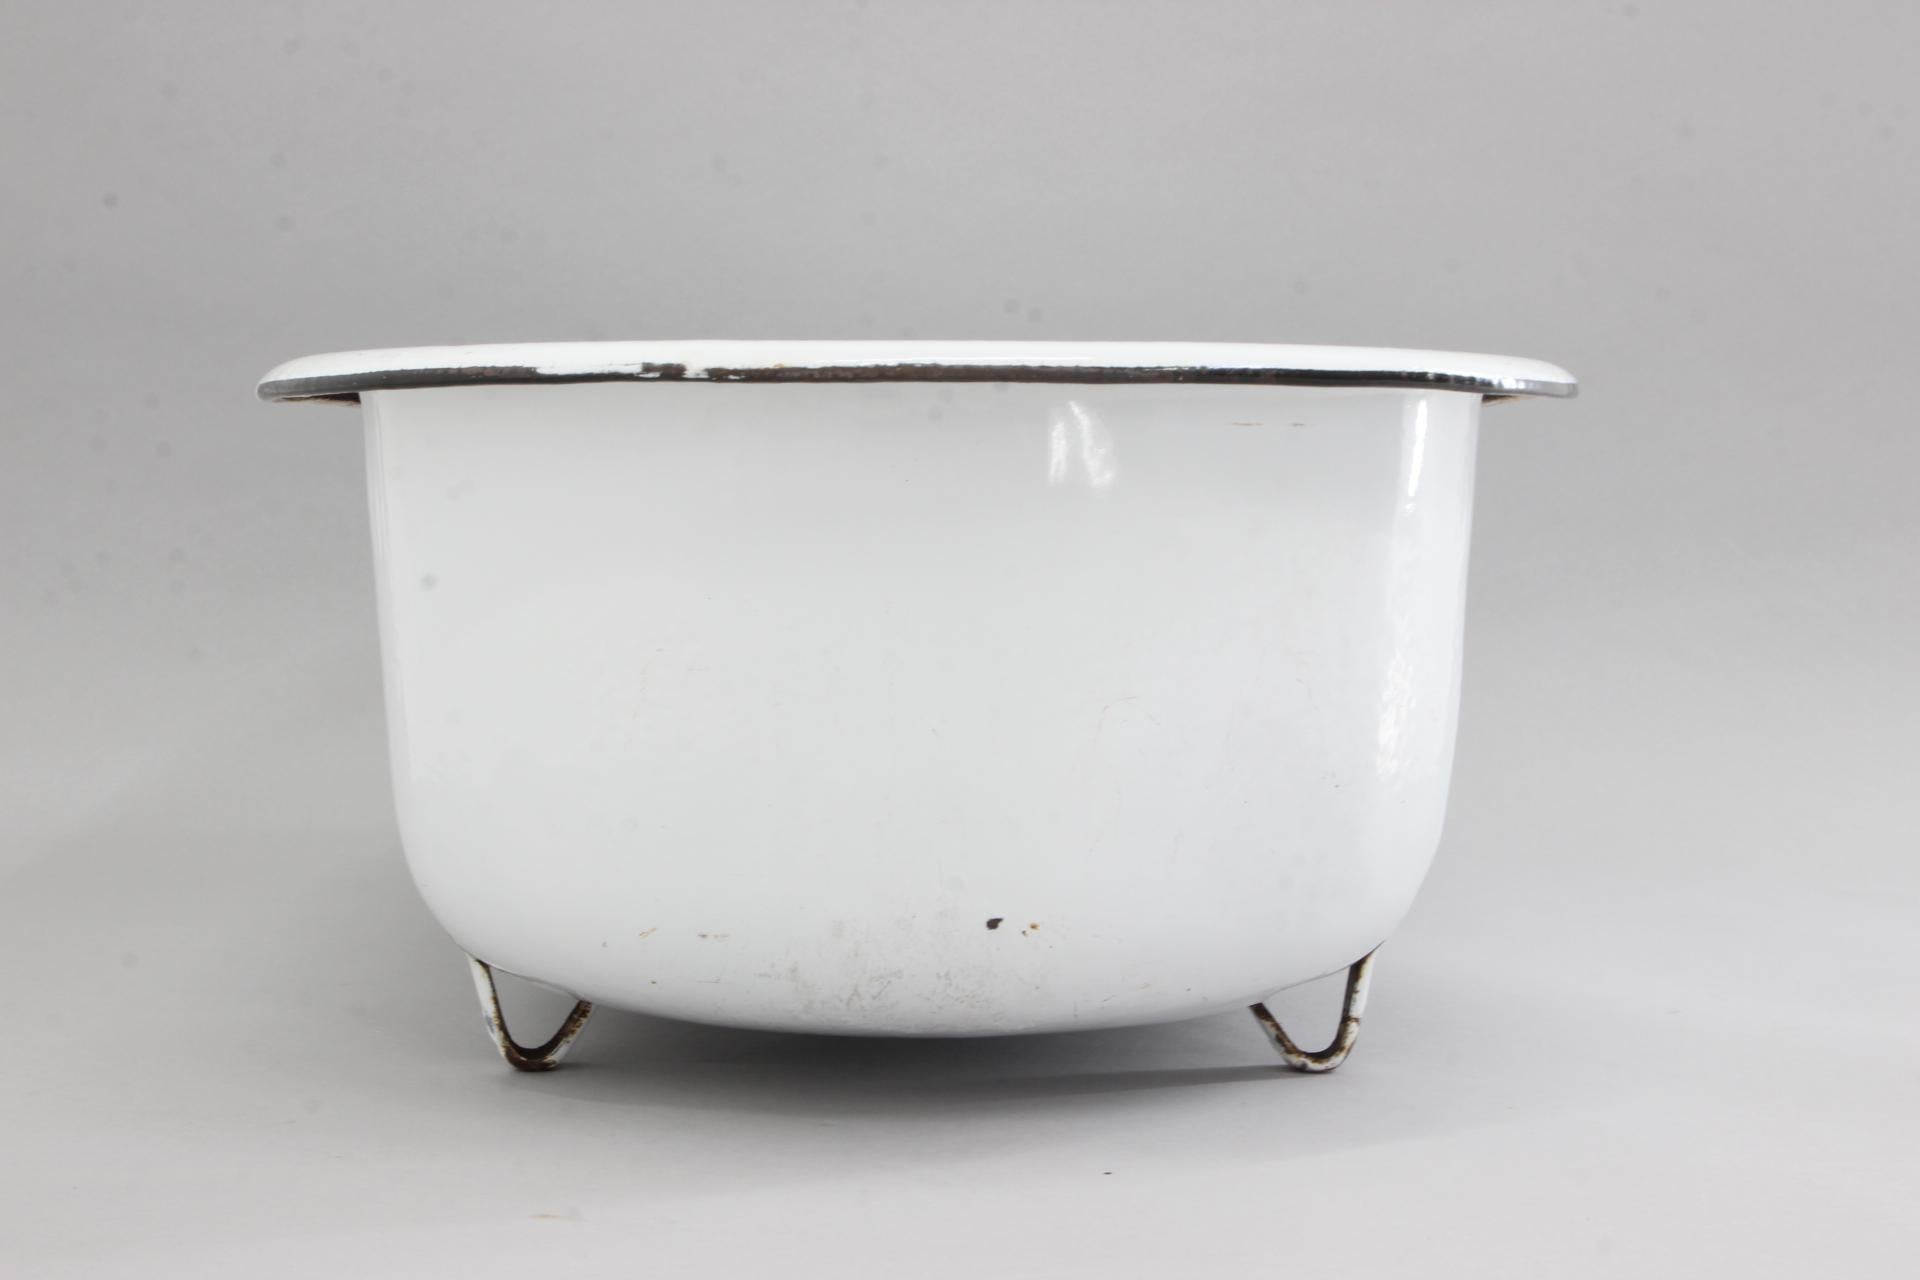  - Vintage enamelled metal bath tub from the early 20th century. 
- Small tub, used for baby bath.
 - Good vintage condition.